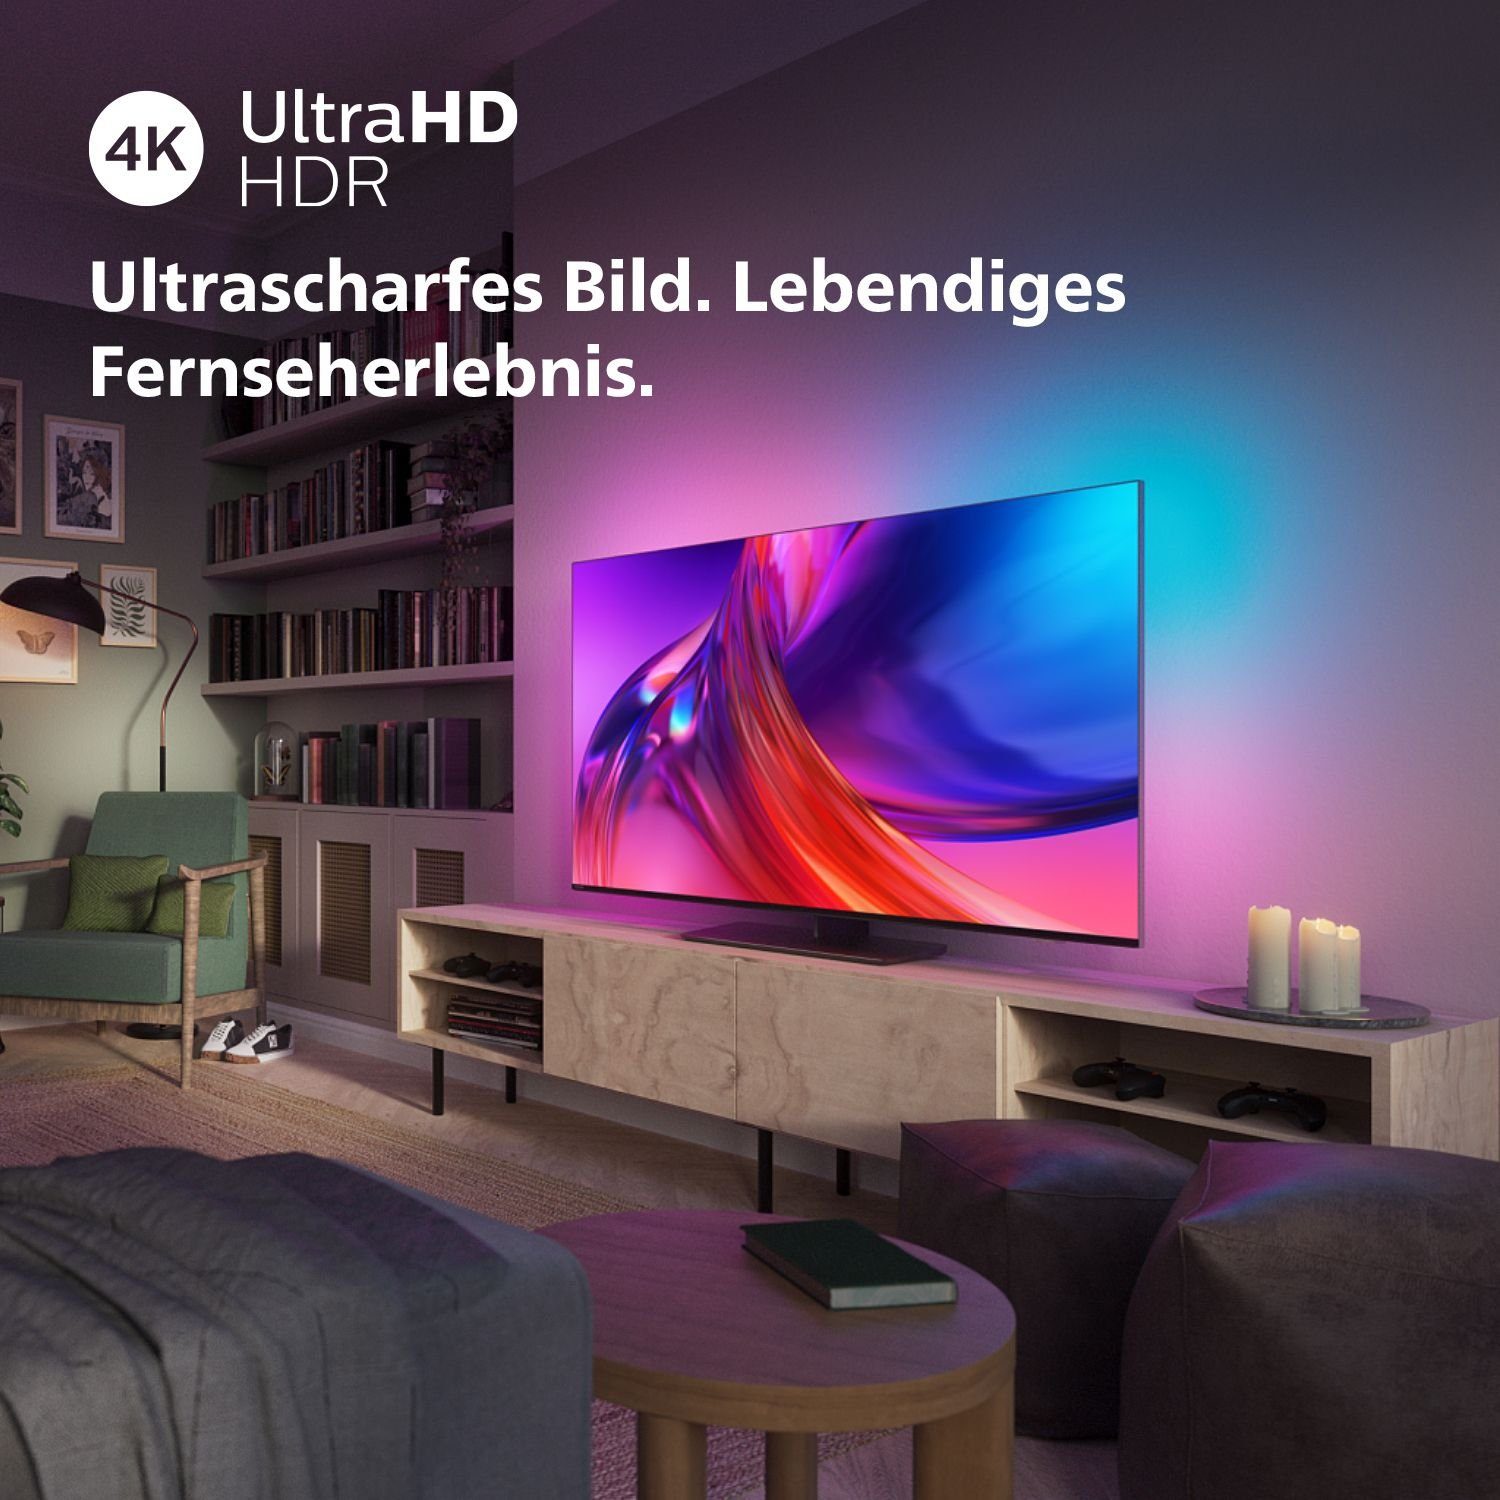 Philips 50PUS8808/12 LED-Fernseher (126 cm/50 Zoll, Smart-TV) Android TV, HD, TV, 4K Ultra Google